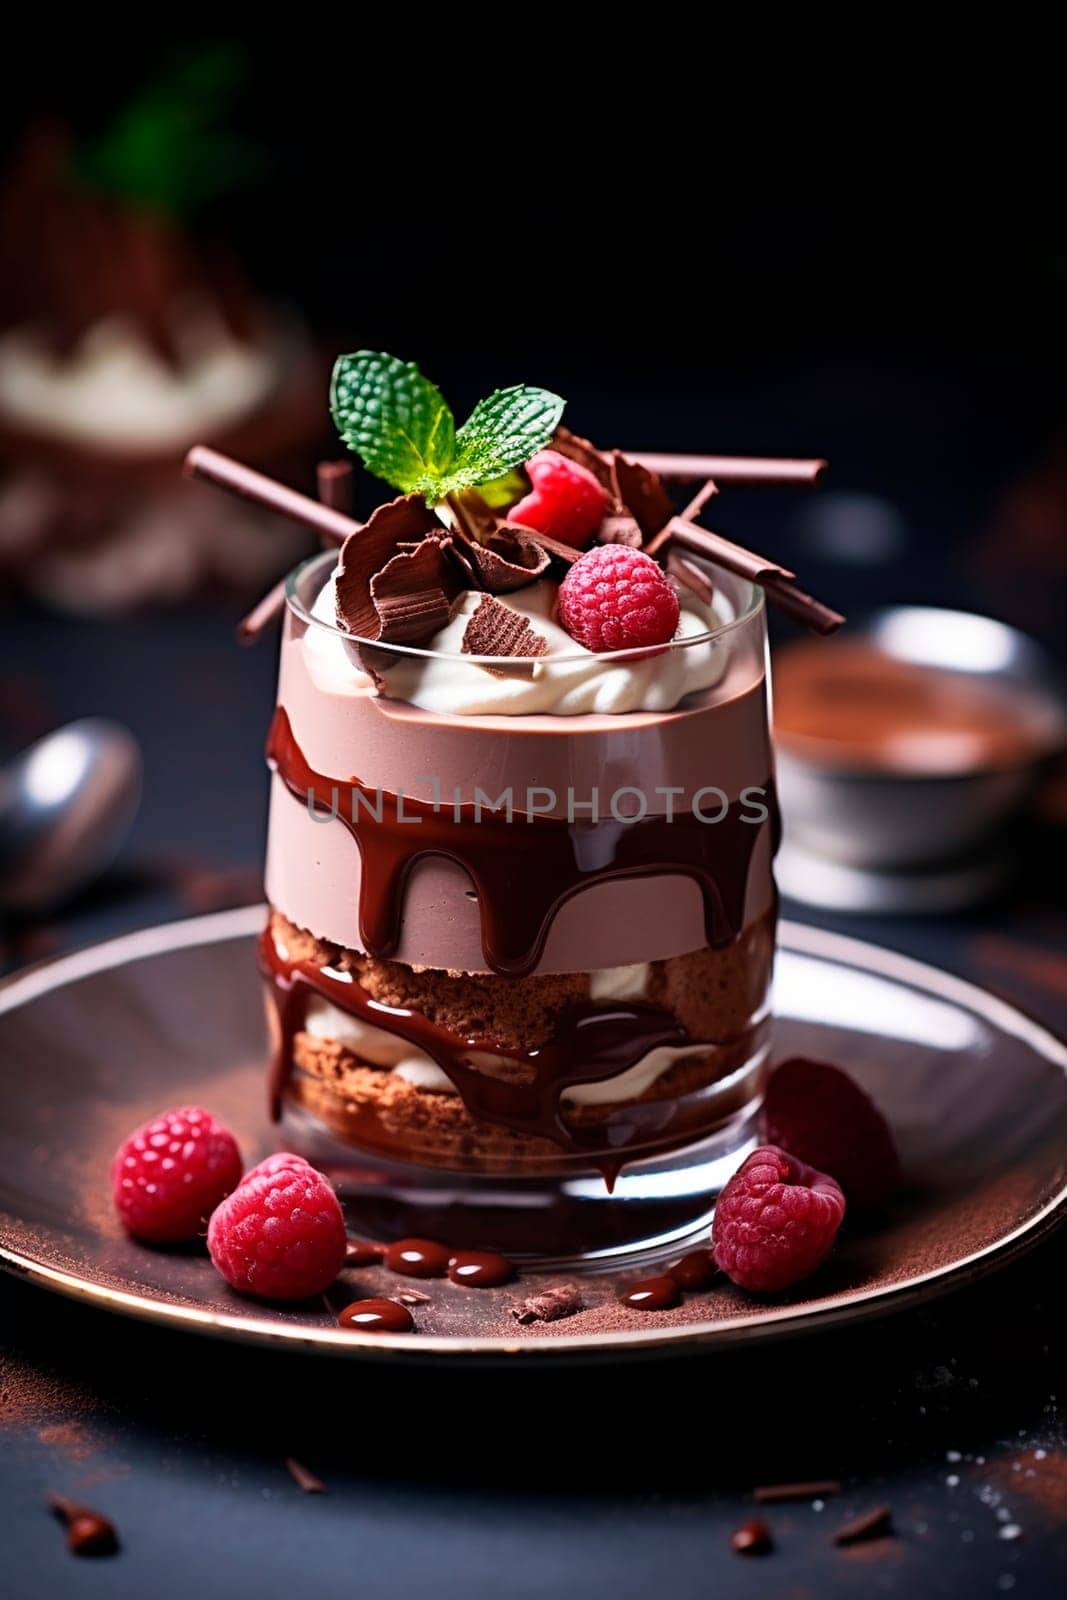 Chocolate mousse dessert on a plate in a glass. Selective focus. Food.